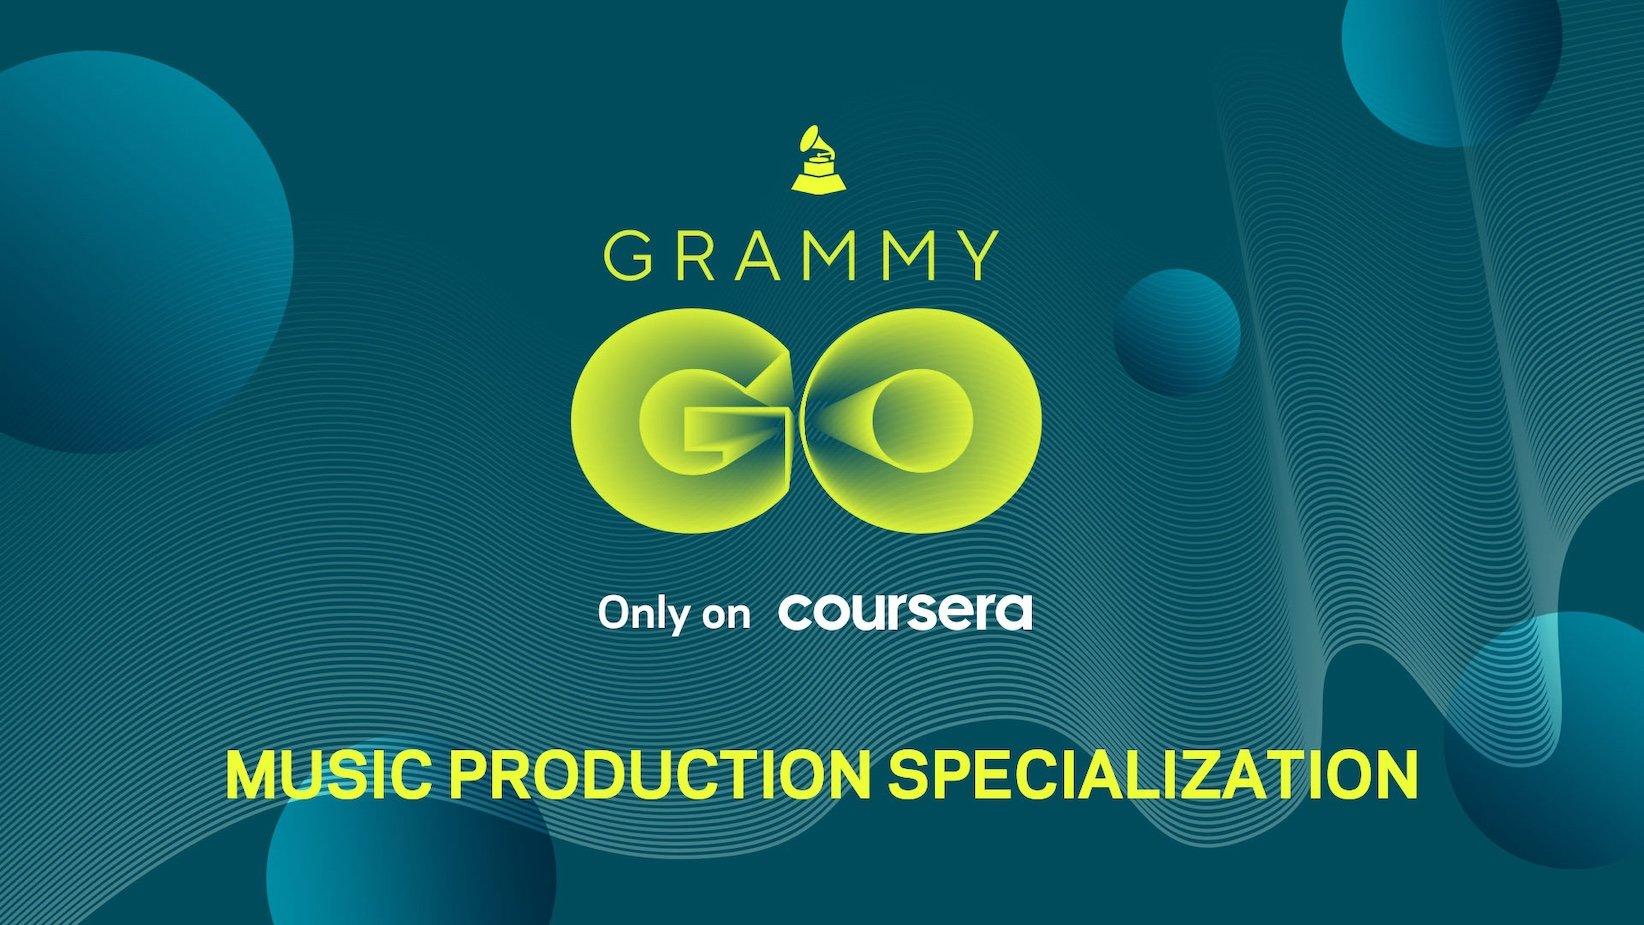 A graphic promoting the Recording Academy's GRAMMY GO educational service. The words "GRAMMY GO," "Only on Coursera," "Music Production Specialization" appear in bright neon green against a dark green background.